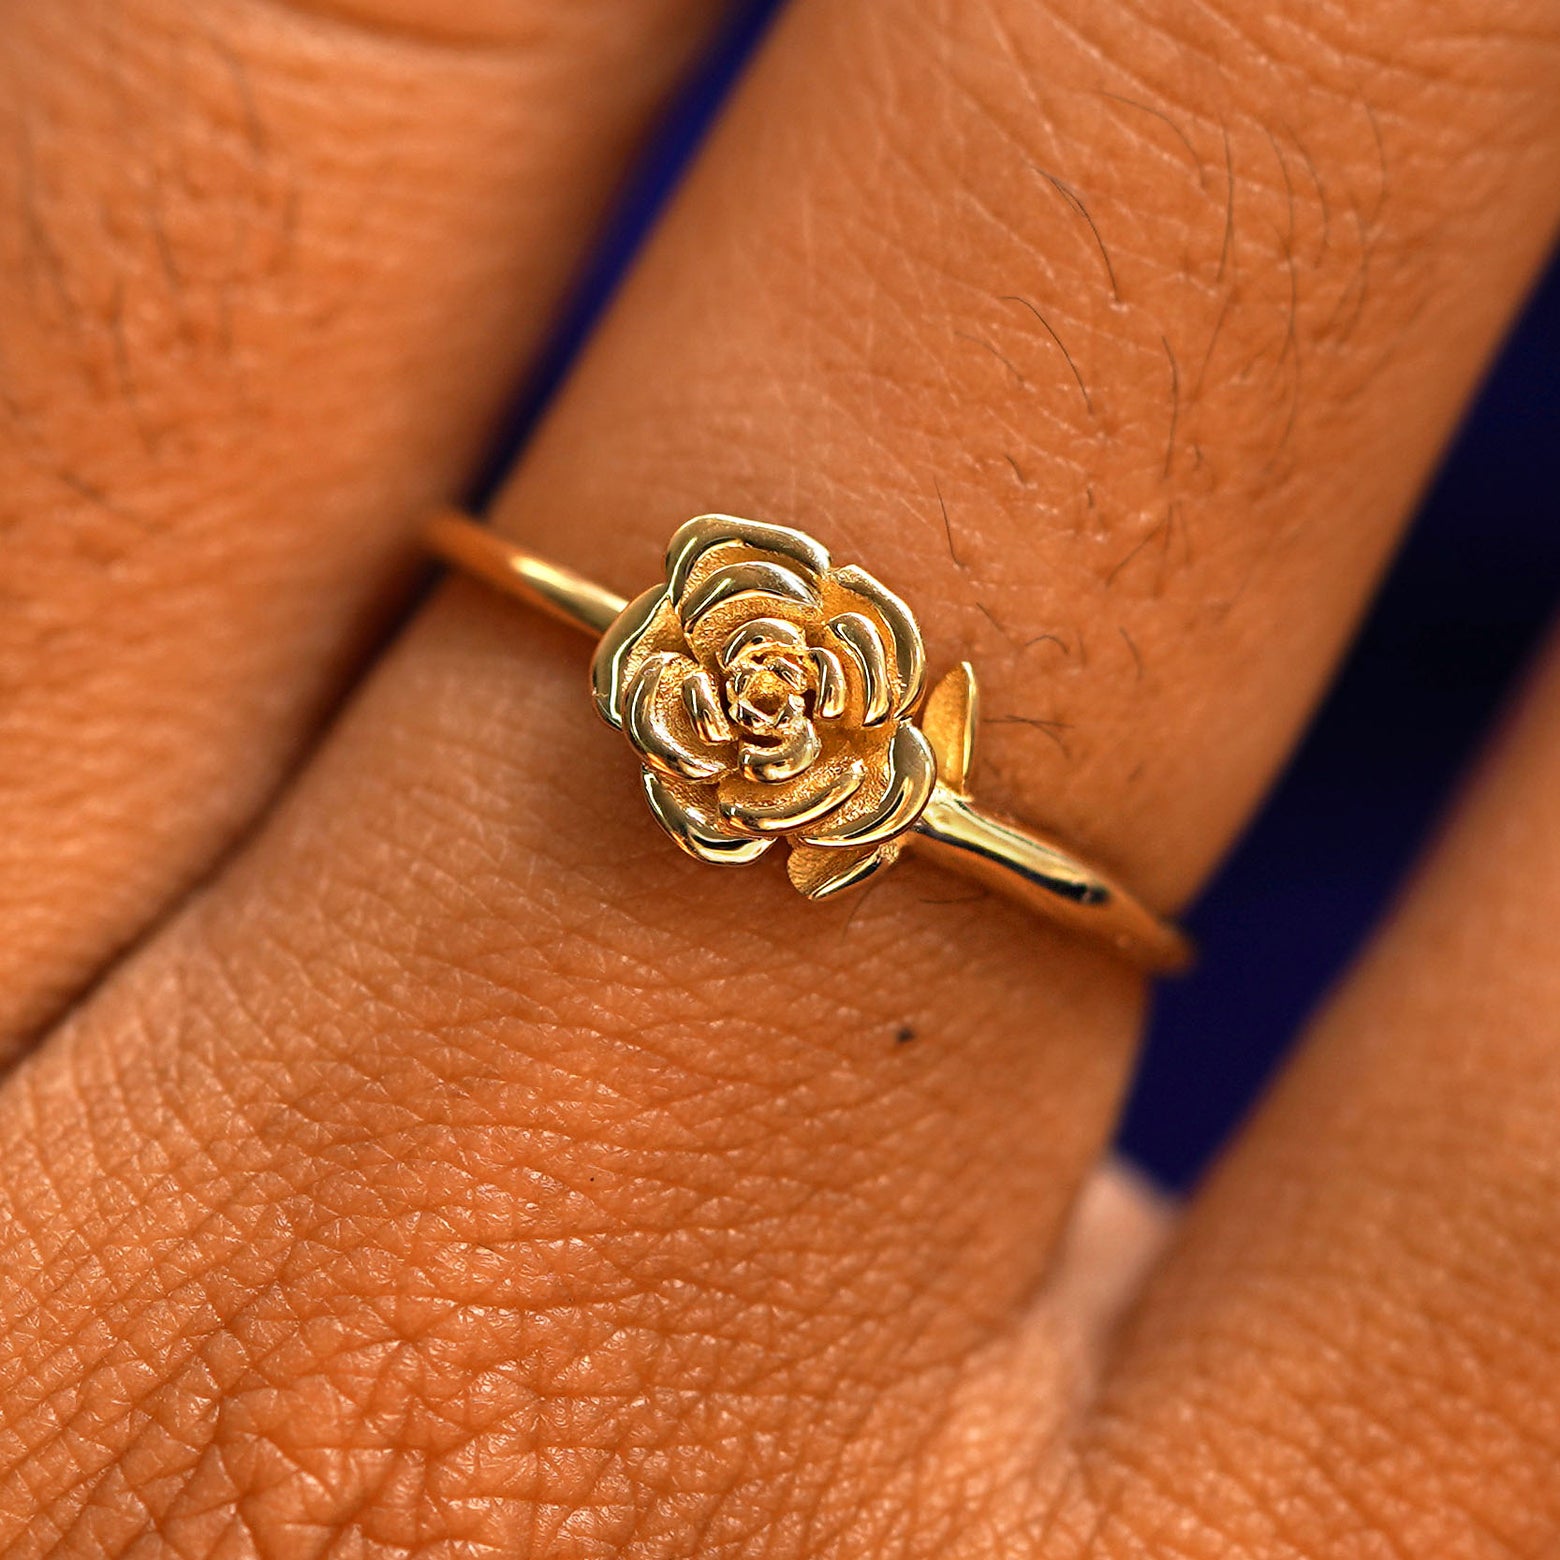 Close up view of a model's hand wearing a solid gold Rose Ring